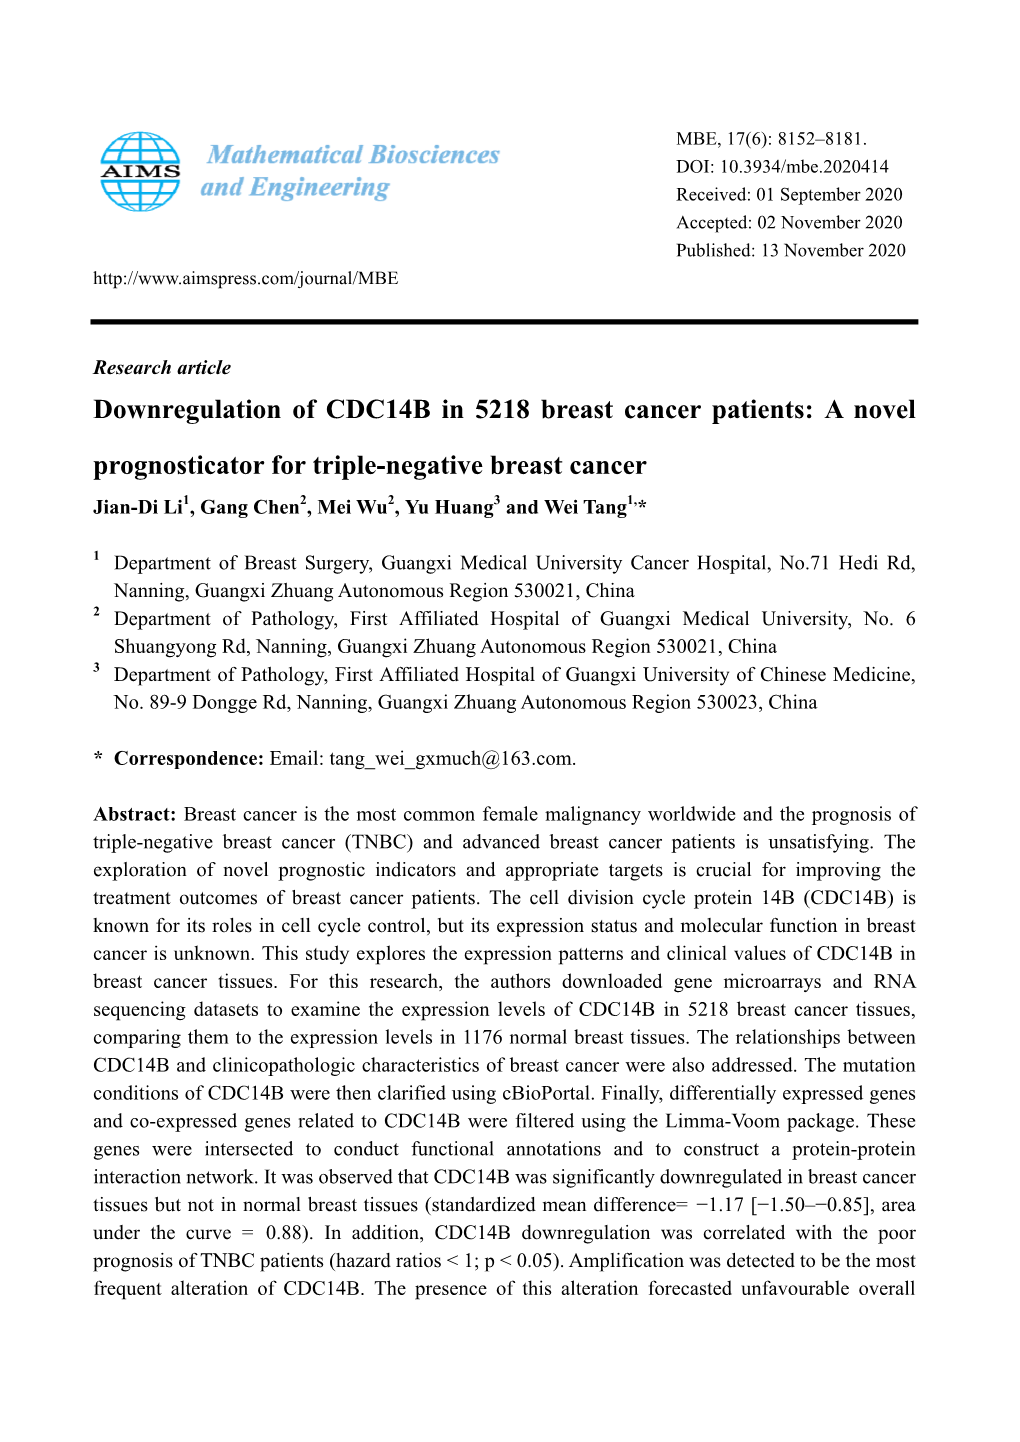 Downregulation of CDC14B in 5218 Breast Cancer Patients: a Novel